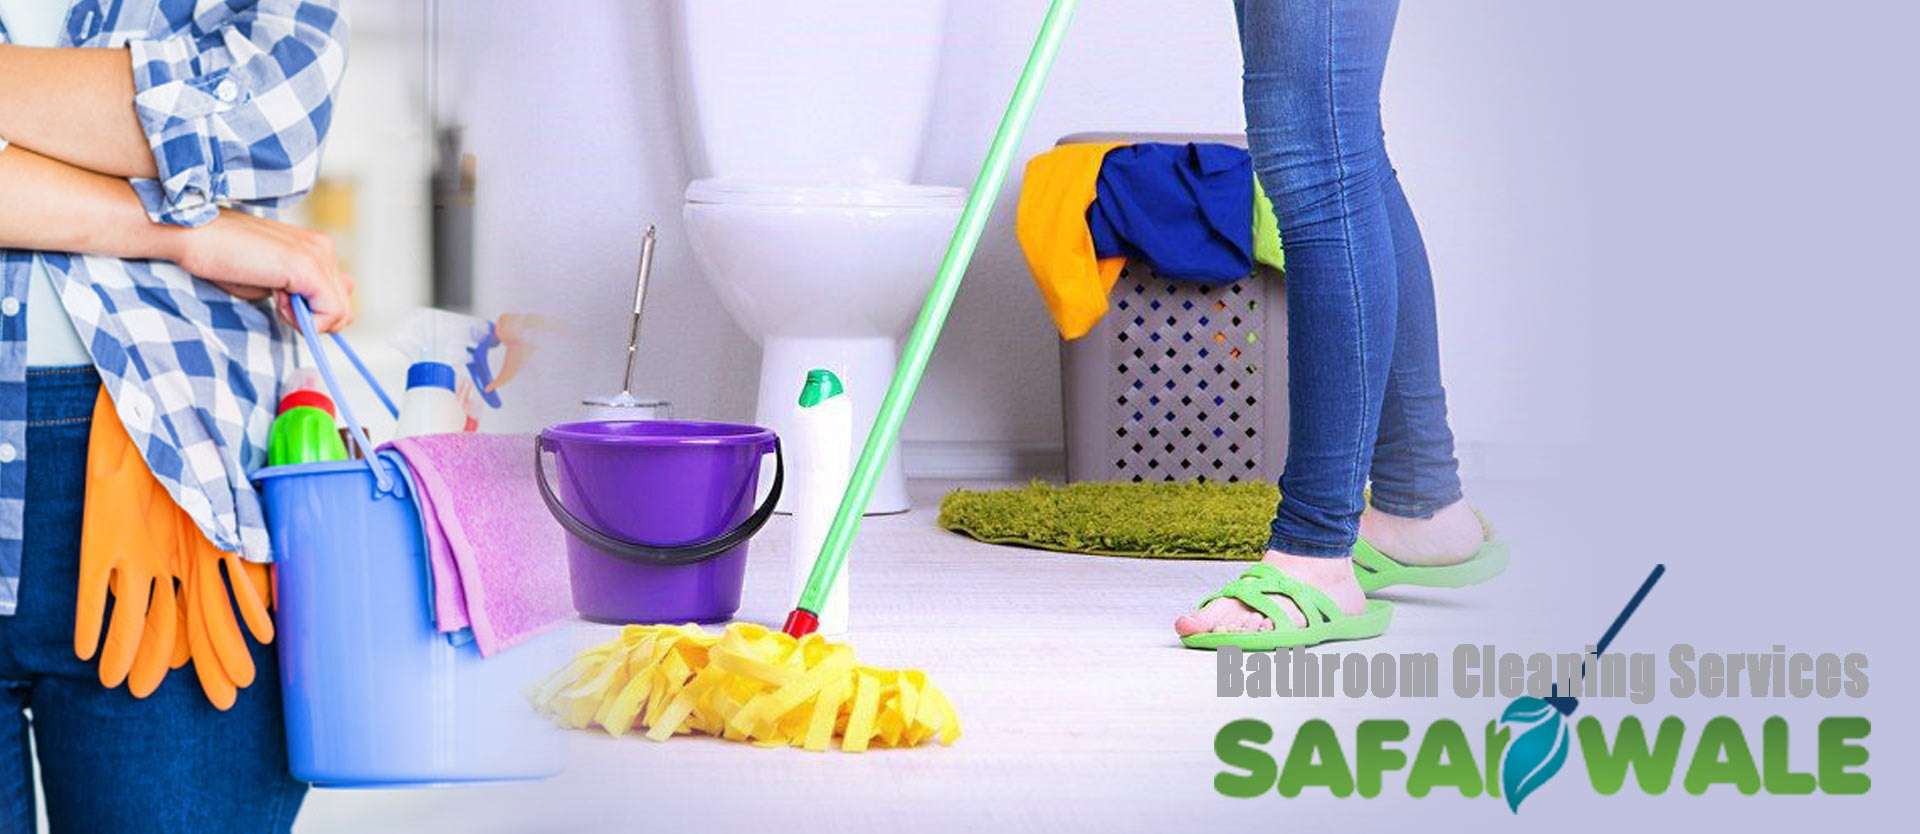 Bathroom Cleaning Services In Bharat City